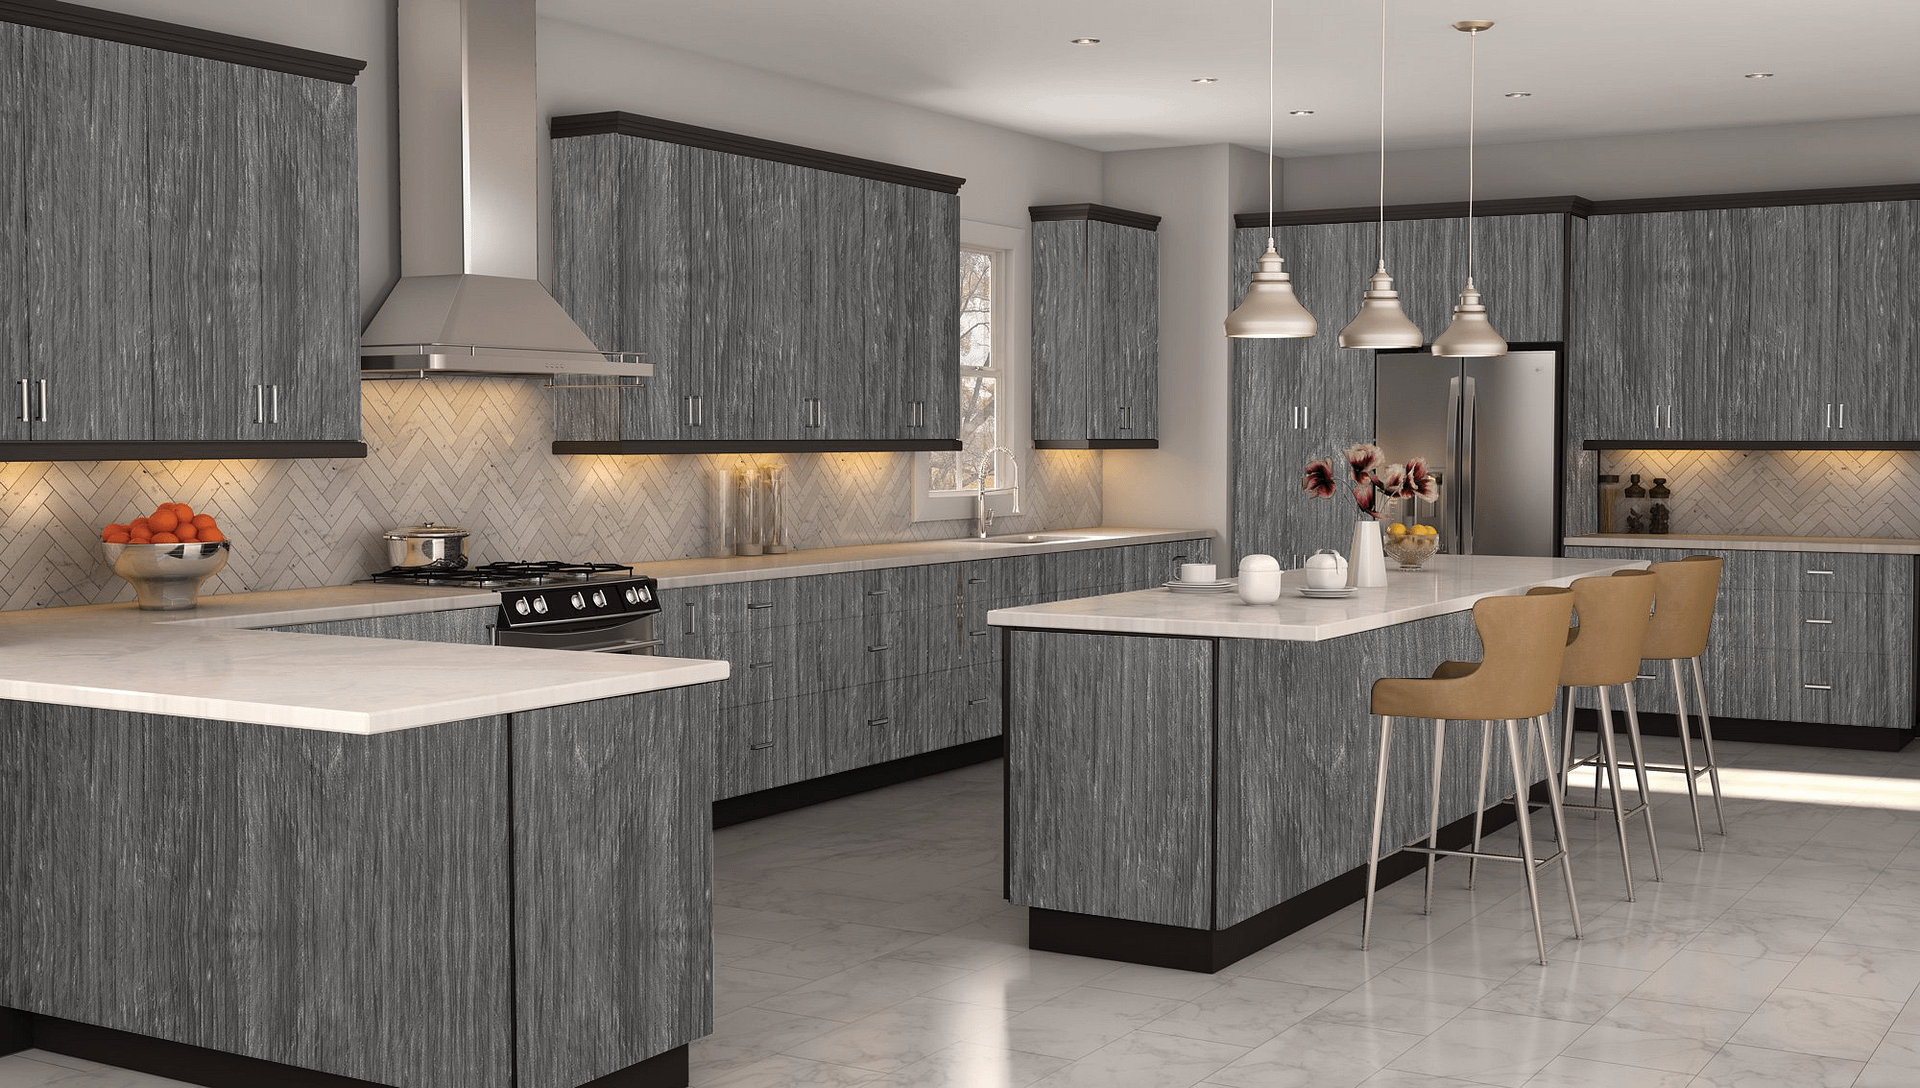 PPT - 5 Good Reasons to Invest In Vinyl Wrap Kitchen Doors